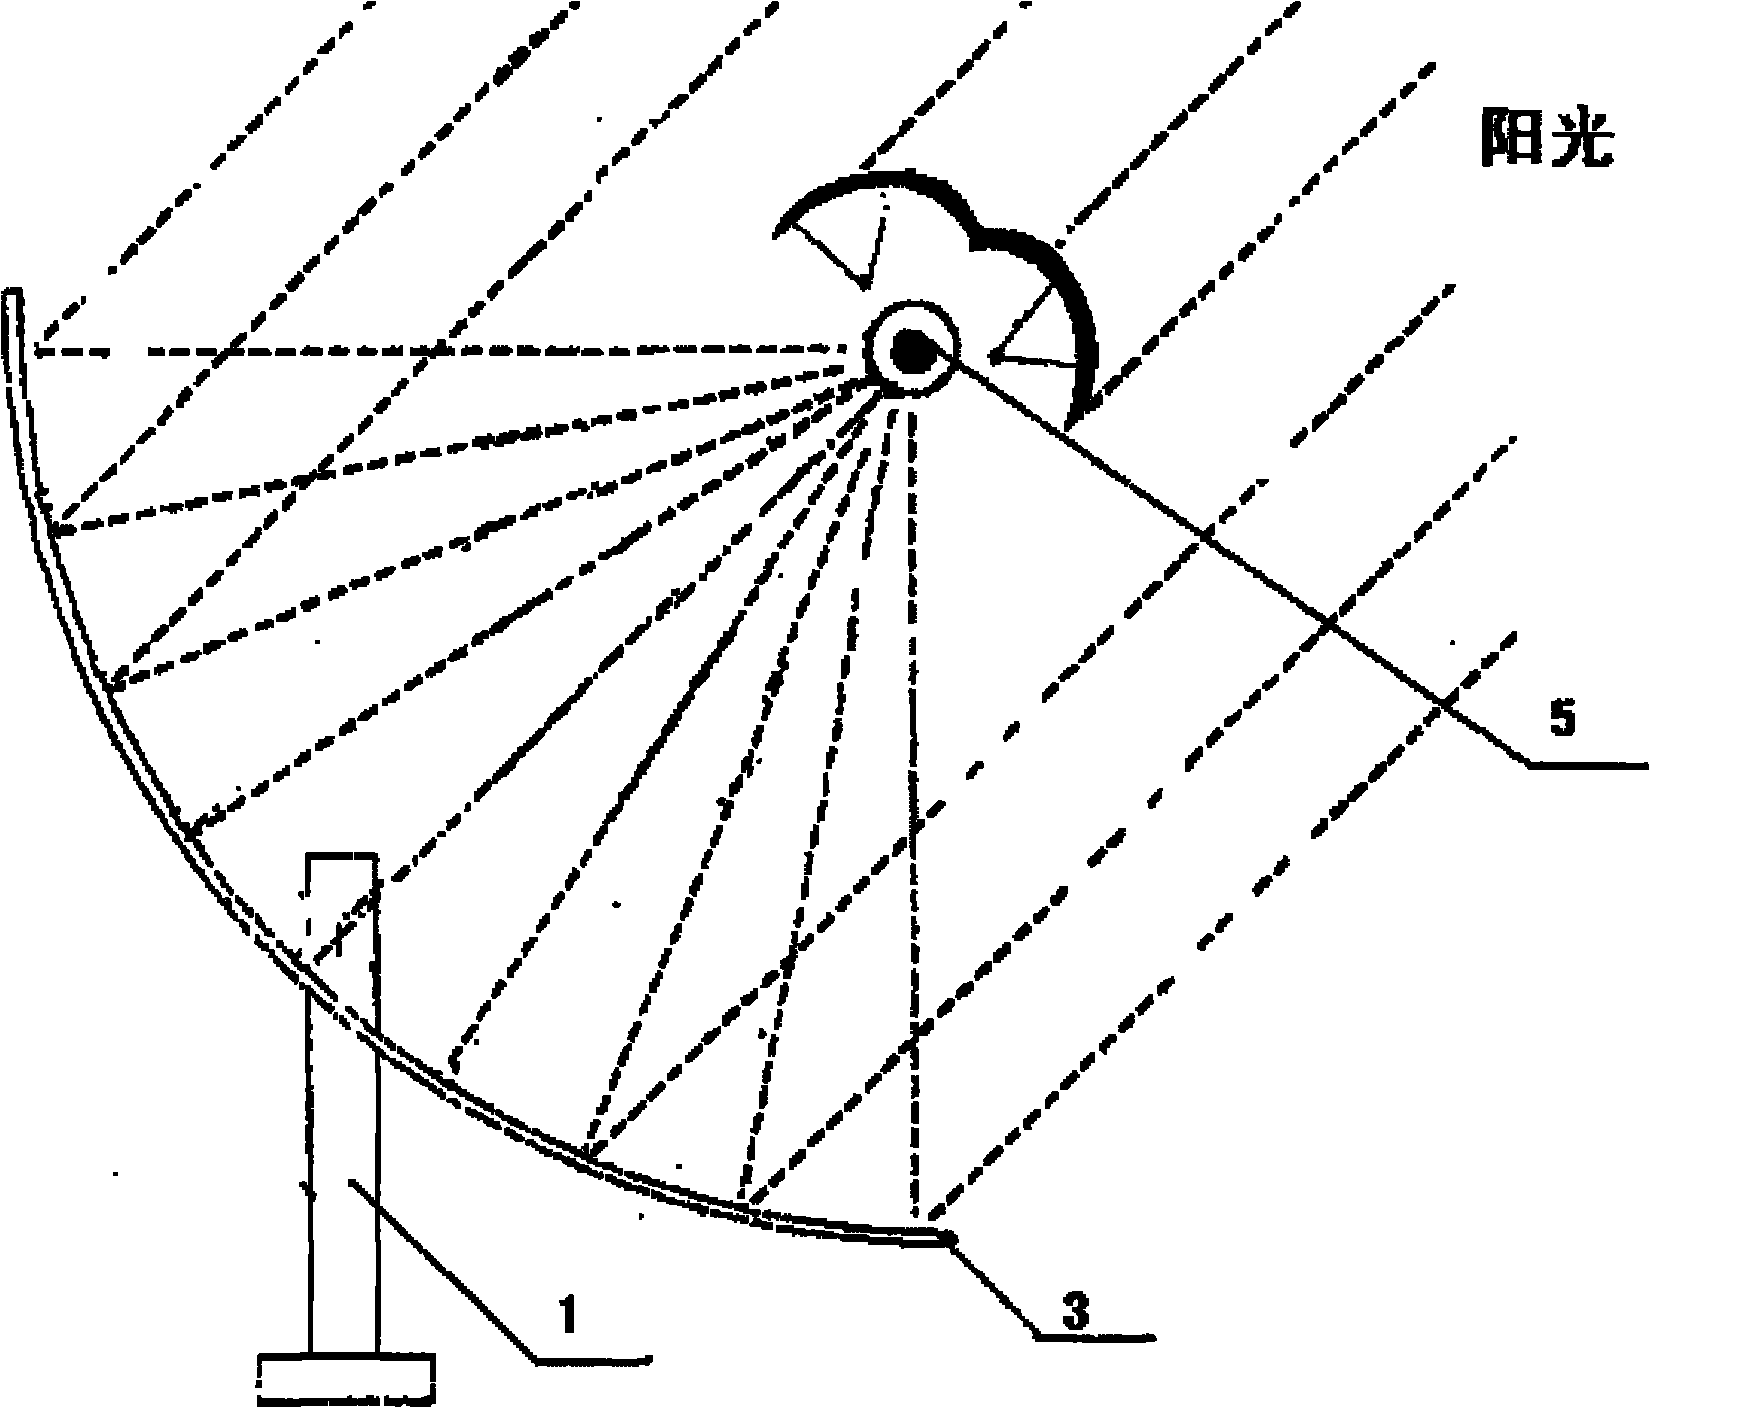 Controllable double-state light reflecting and concentrating solar heat collecting generator